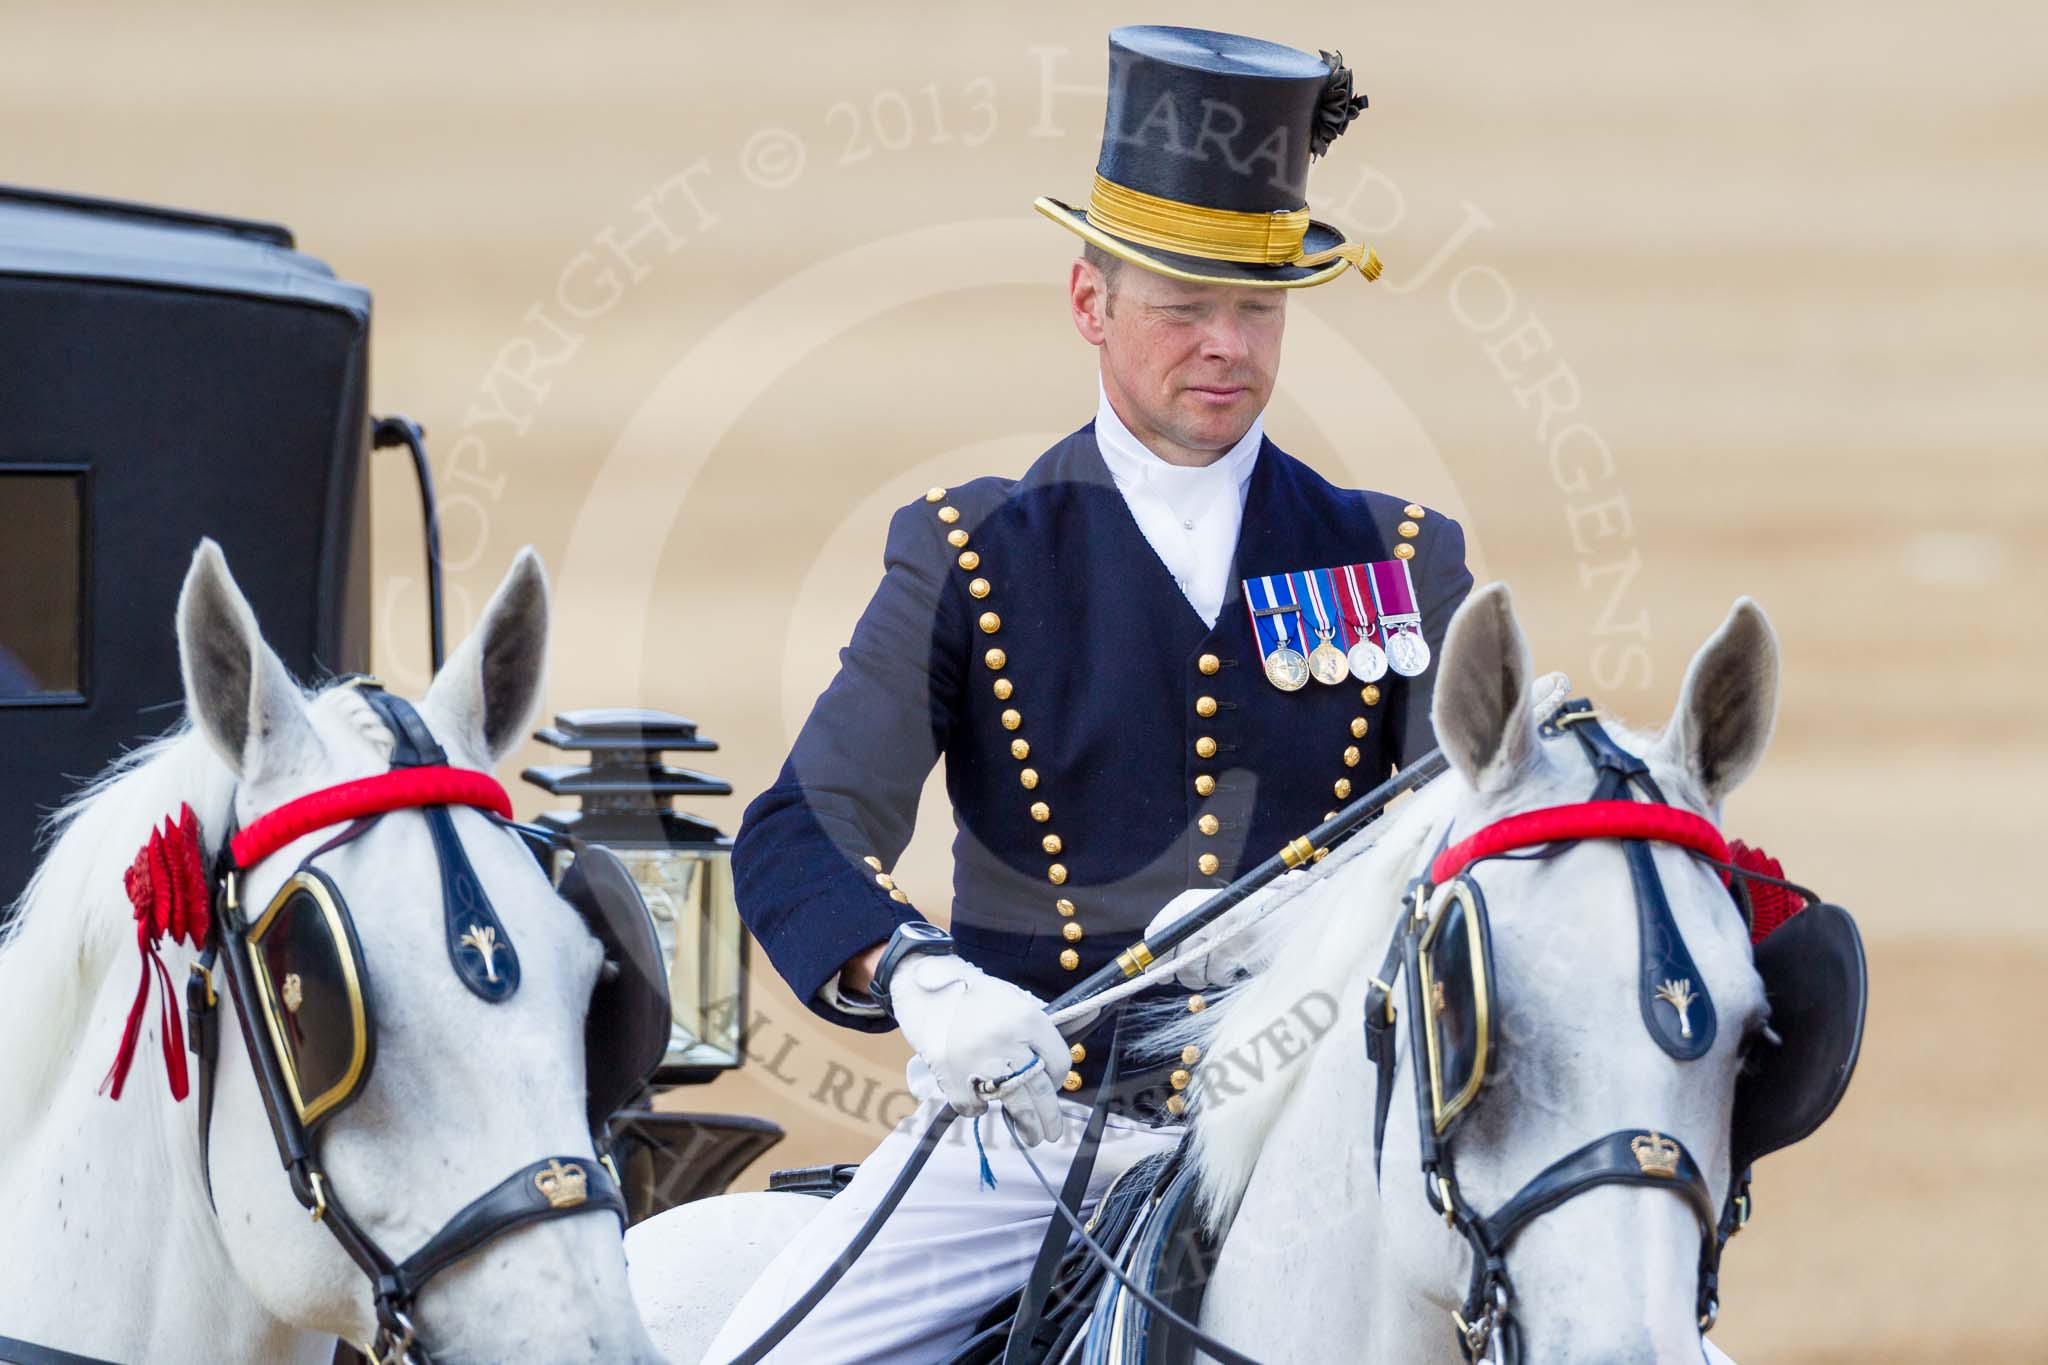 The Colonel's Review 2015.
Horse Guards Parade, Westminster,
London,

United Kingdom,
on 06 June 2015 at 11:05, image #230